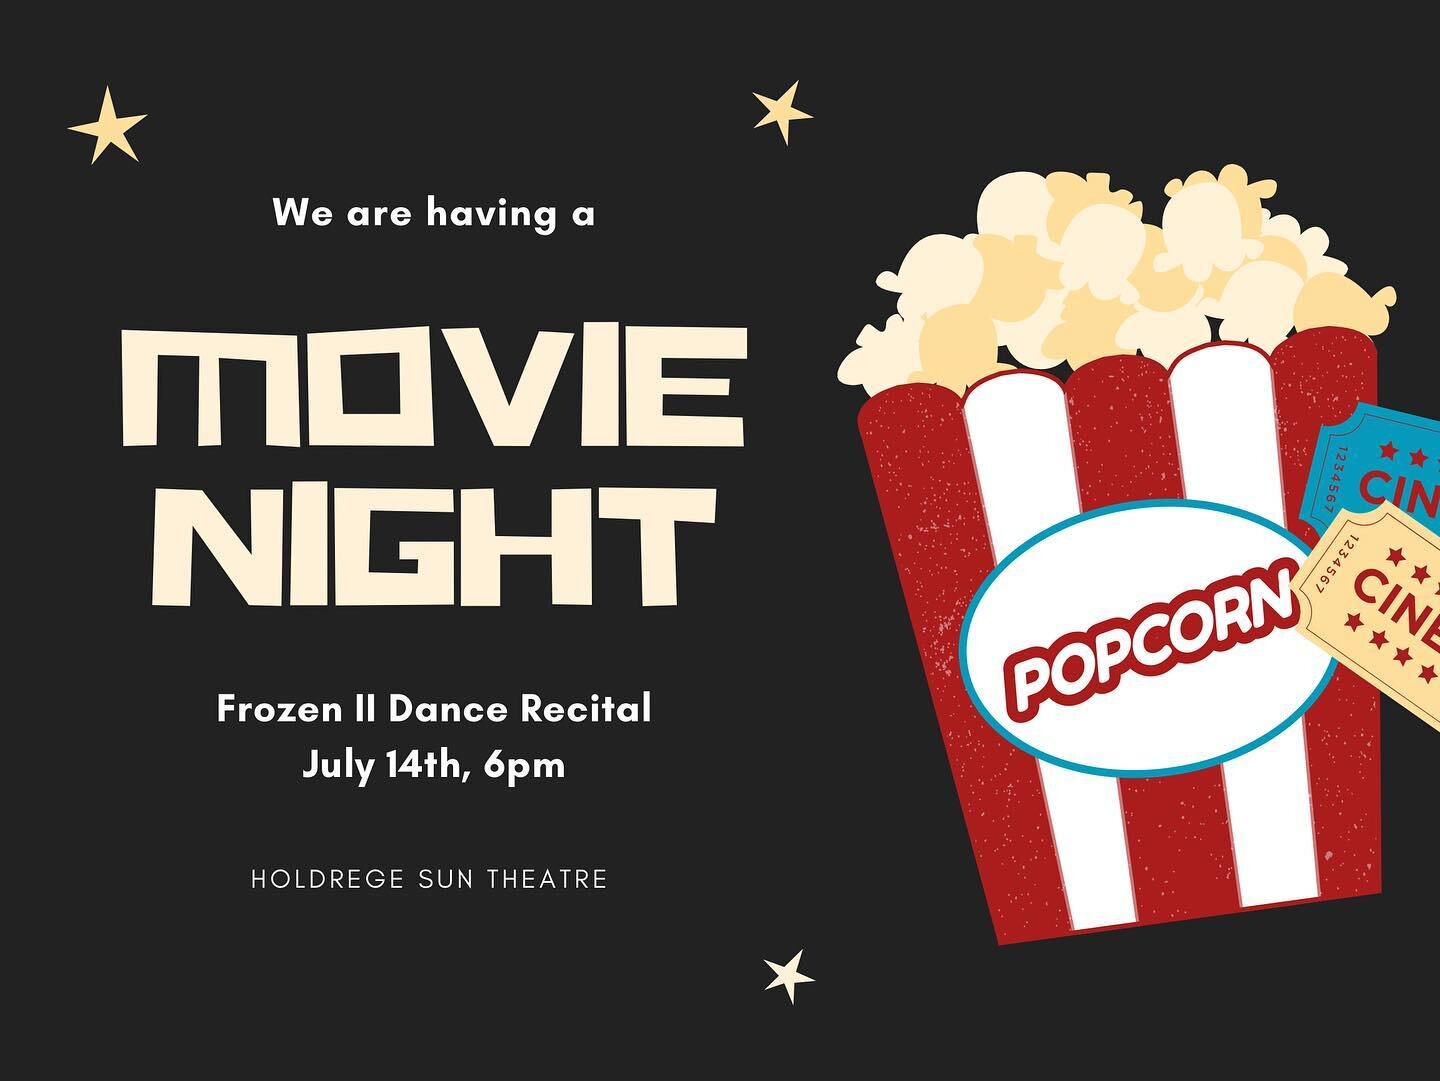 Don&rsquo;t miss our showing of the 2022 dance recital, Frozen II. This Thursday, 6pm at the Holdrege Sun!